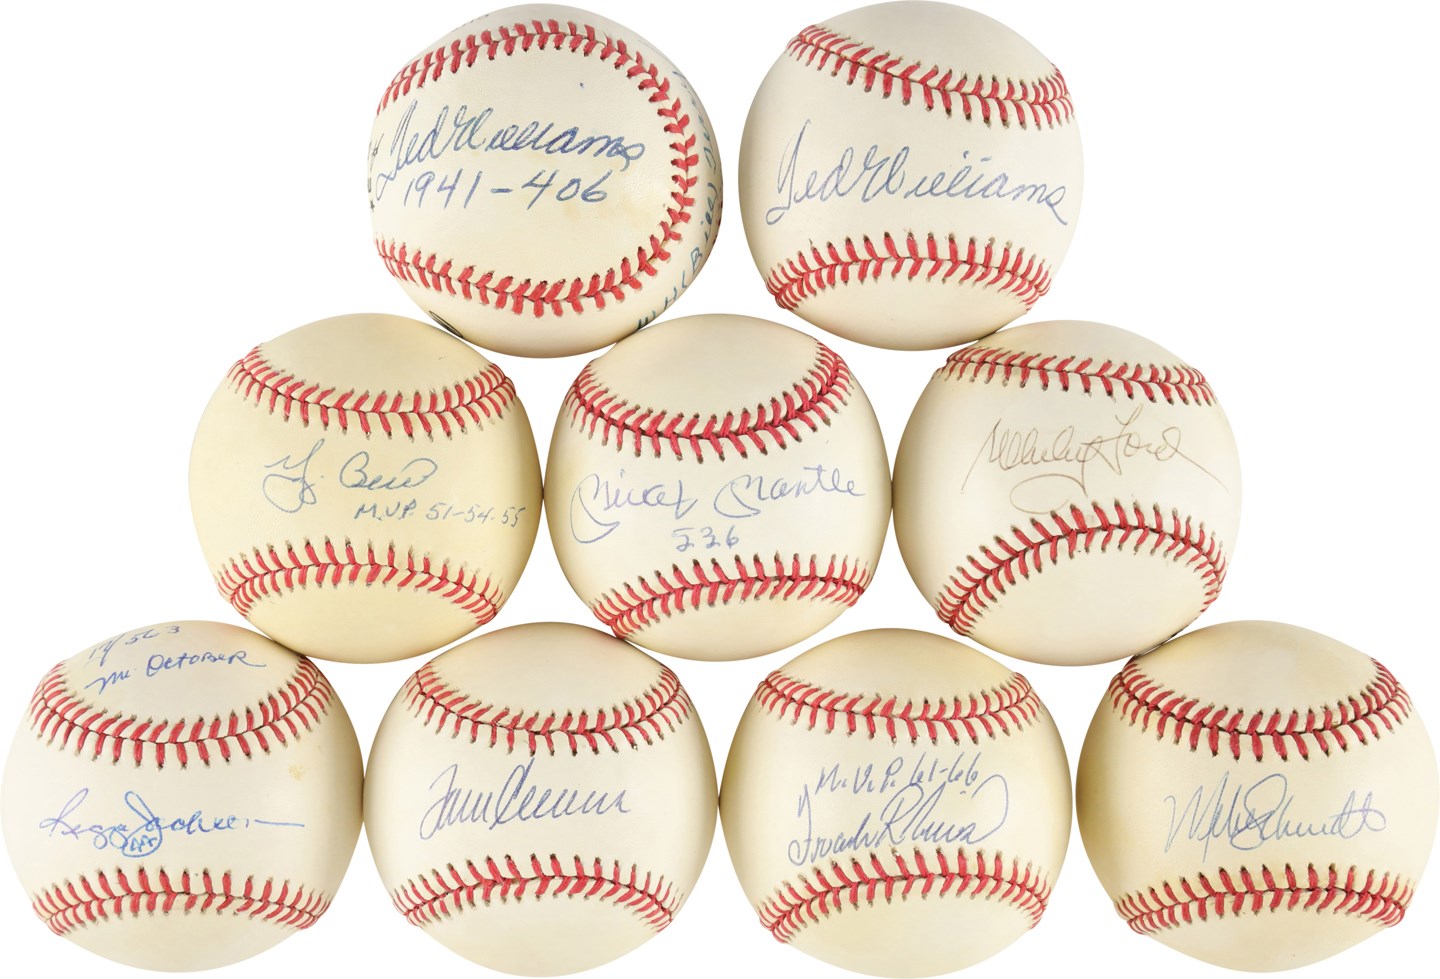 Baseball Autographs - Hall of Famers Signed Baseball Collection w/Mantle & Williams (9)